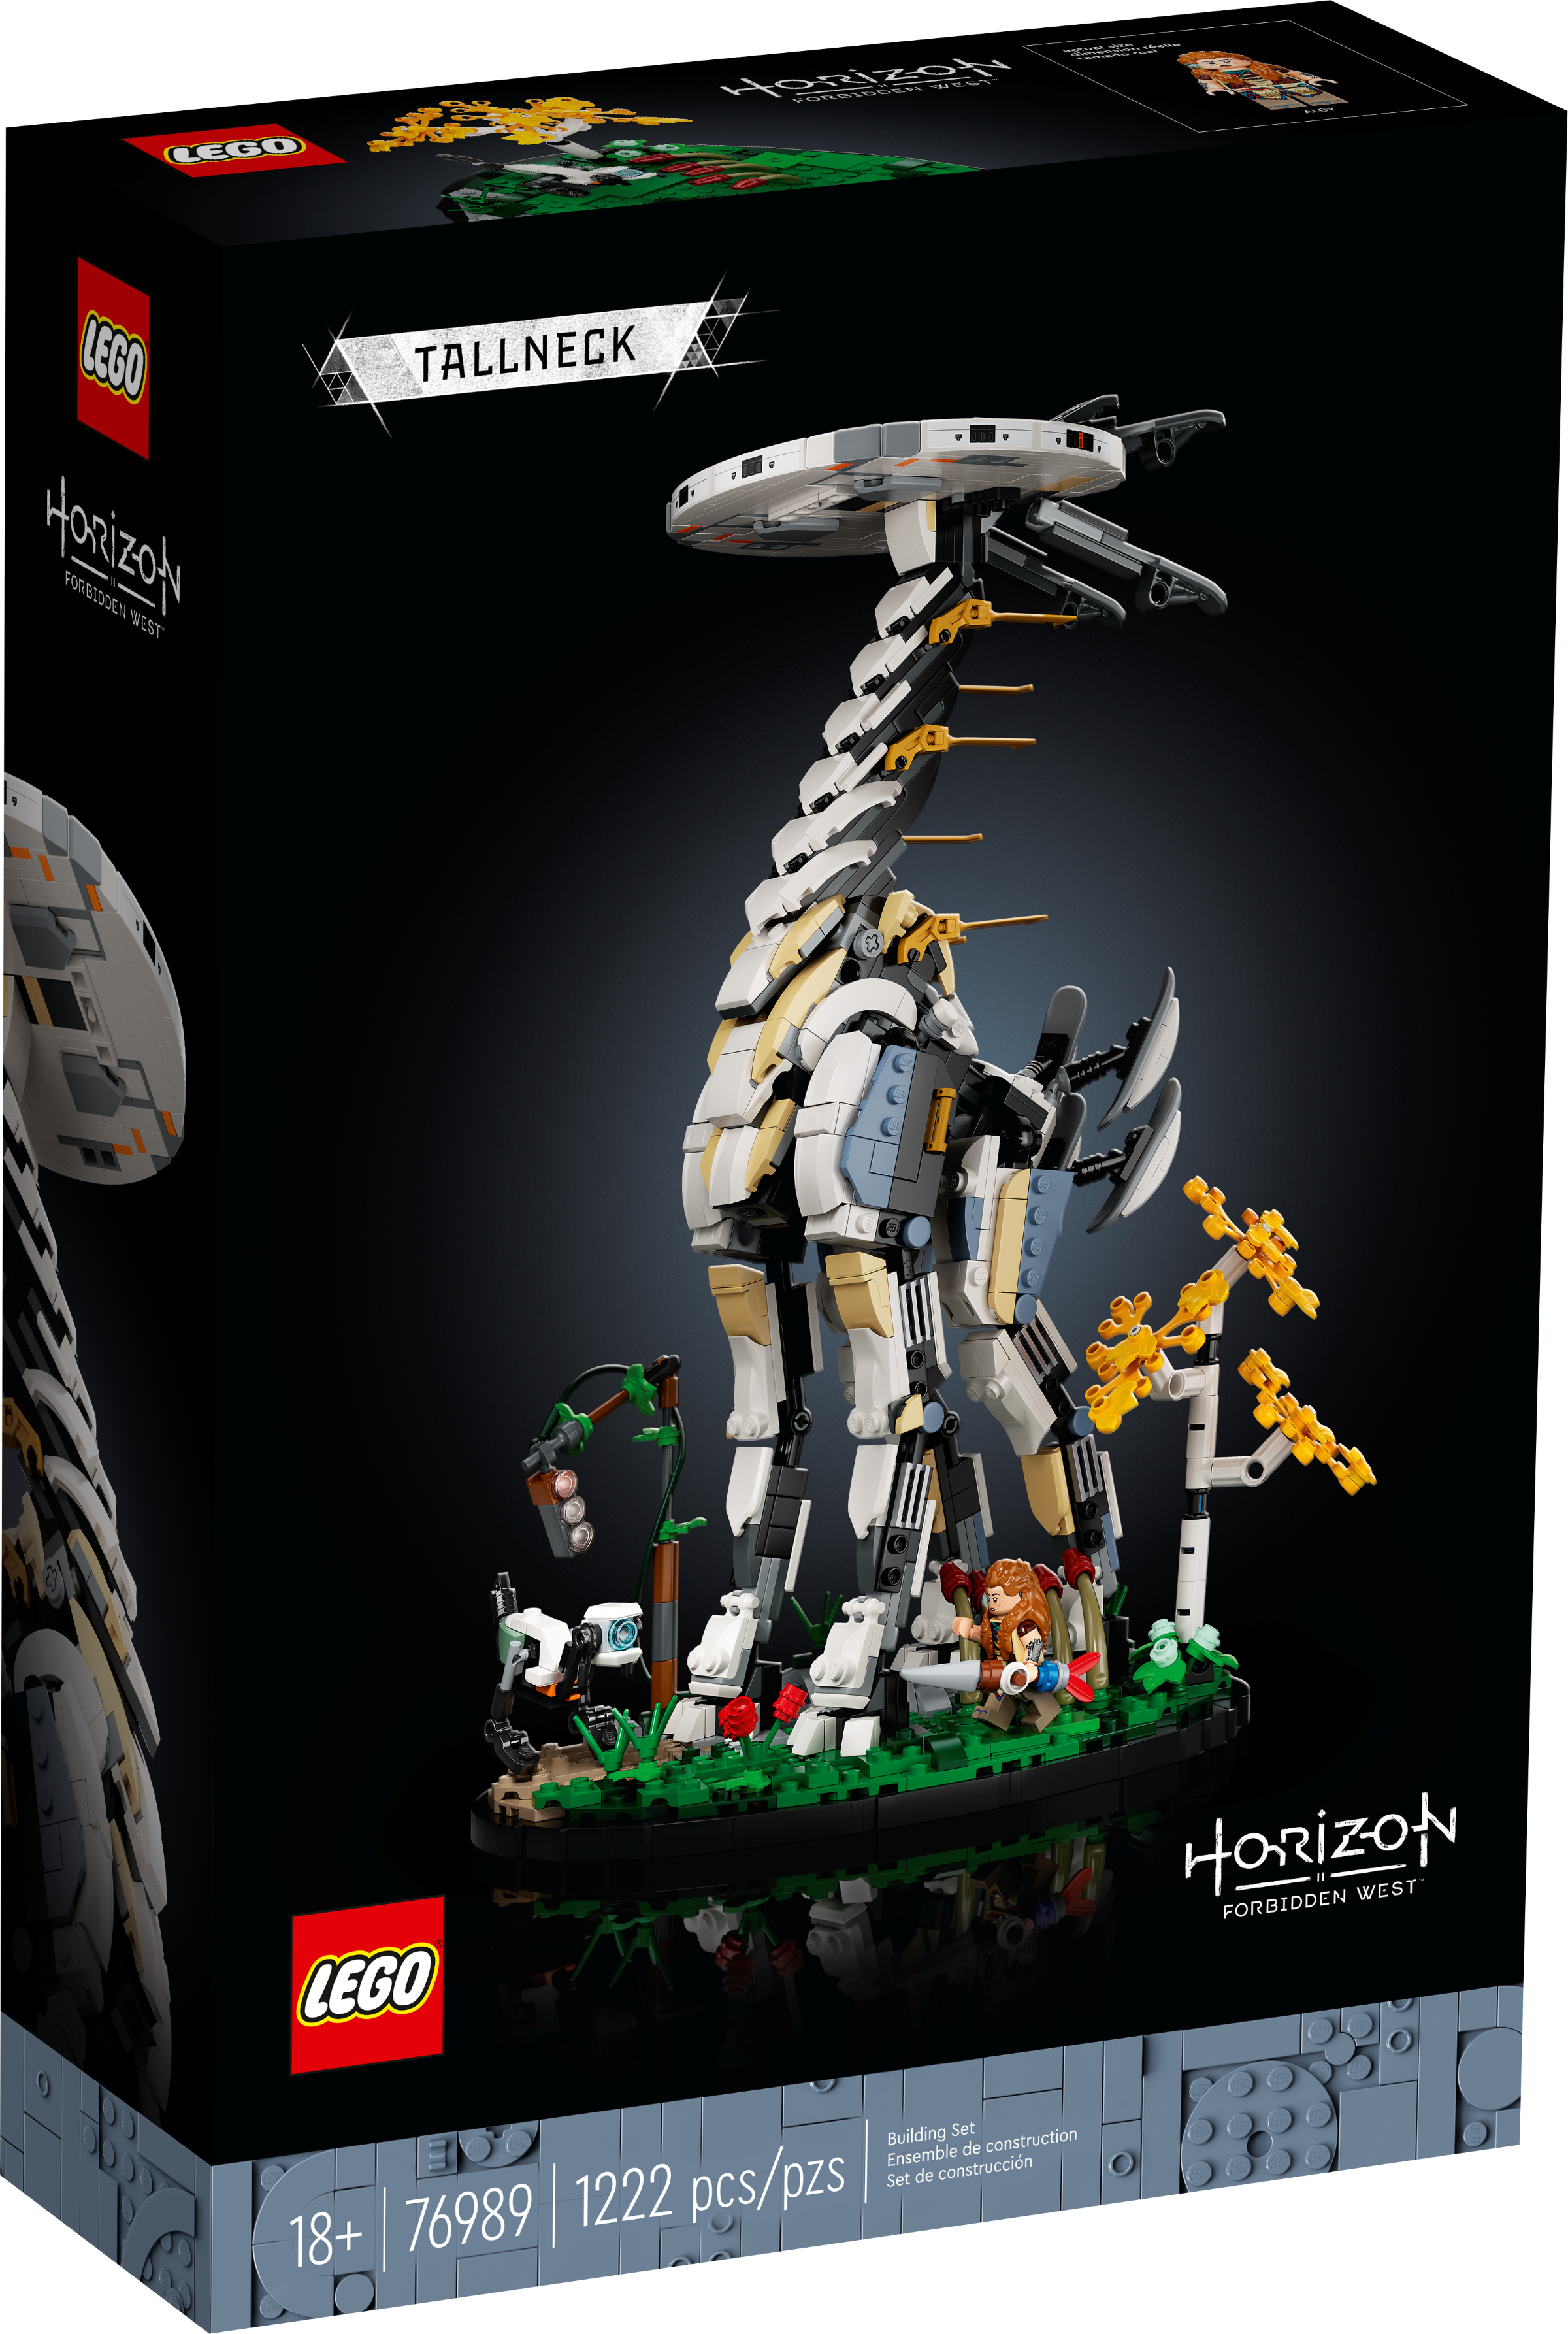 Horizon Forbidden West: Tallneck 76989 | Other Buy online at the Official LEGO® Shop US